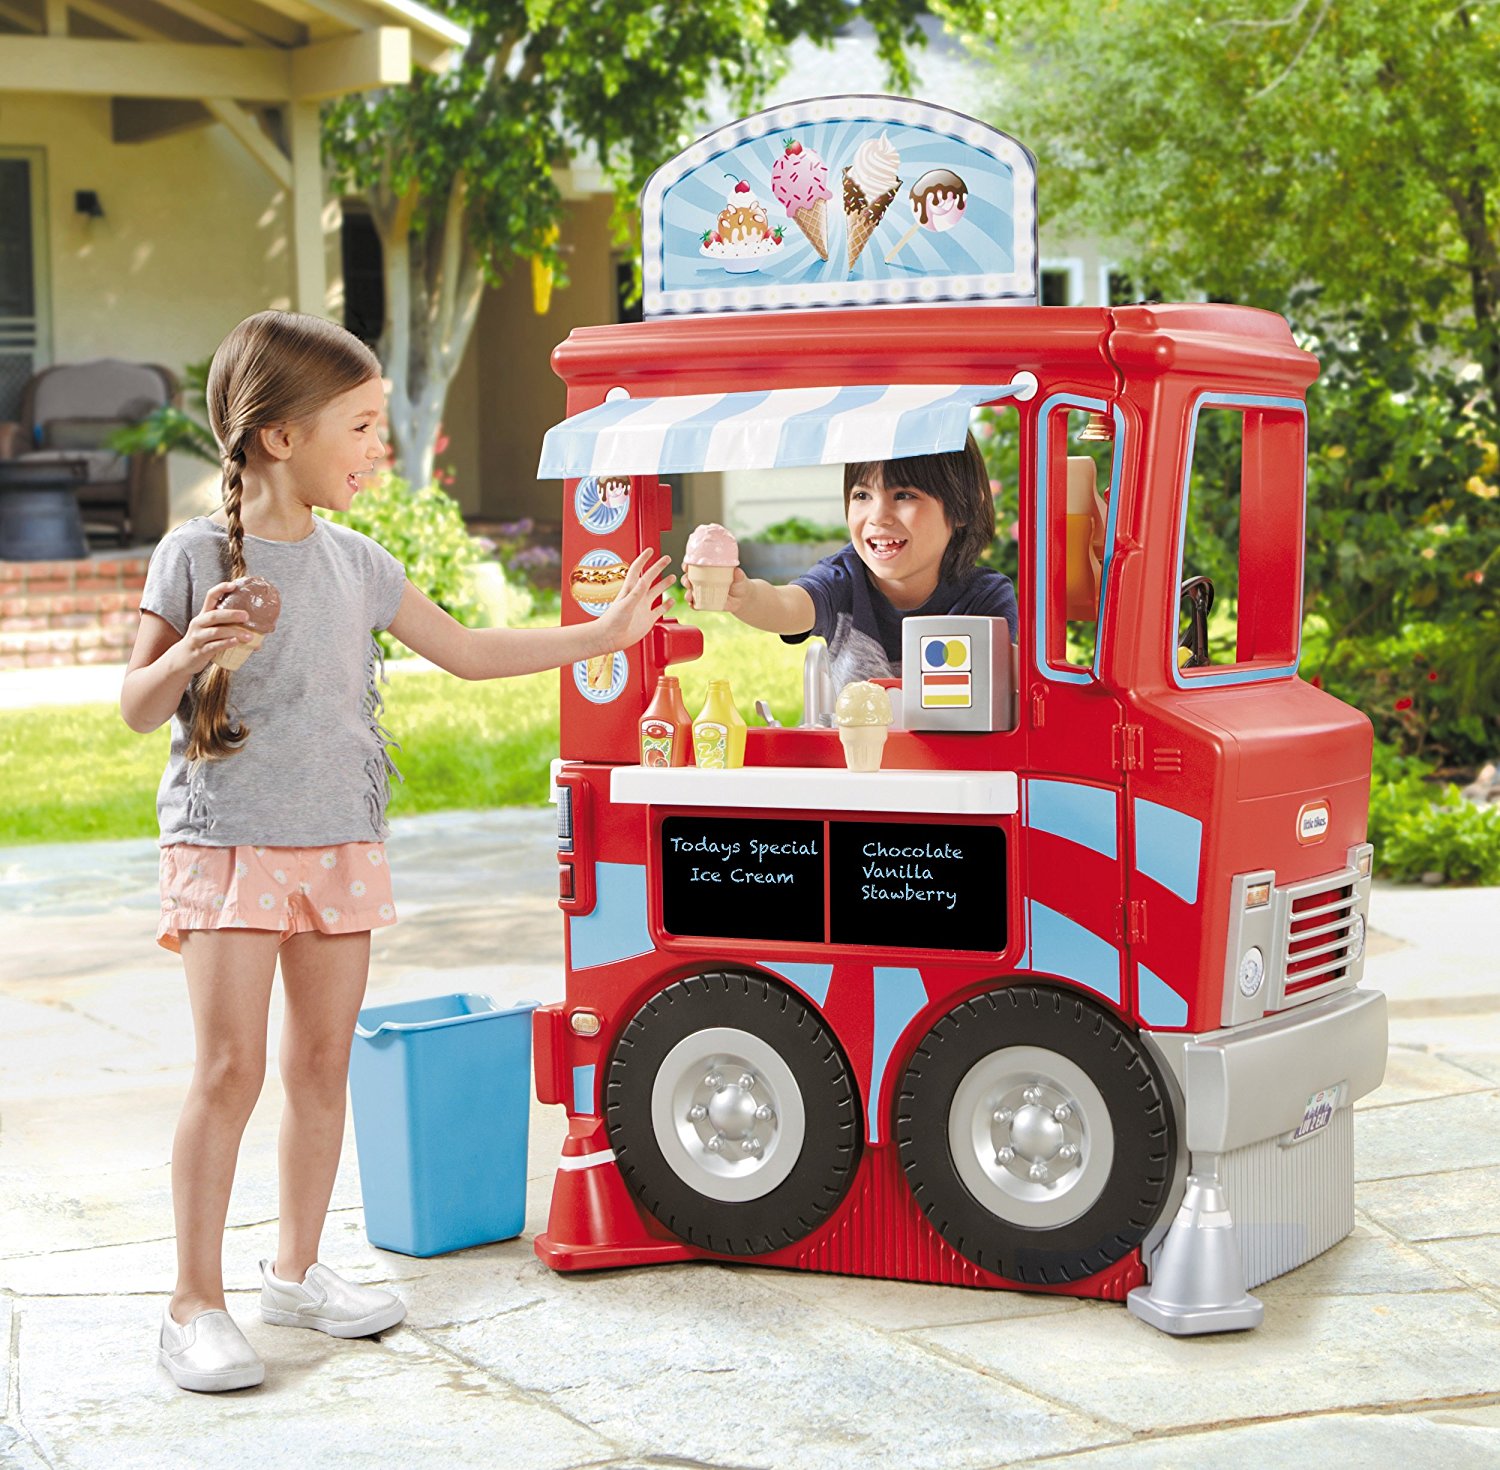 Little Tikes 2-in-1 Play Food Truck / Kitchen Only $76.49!